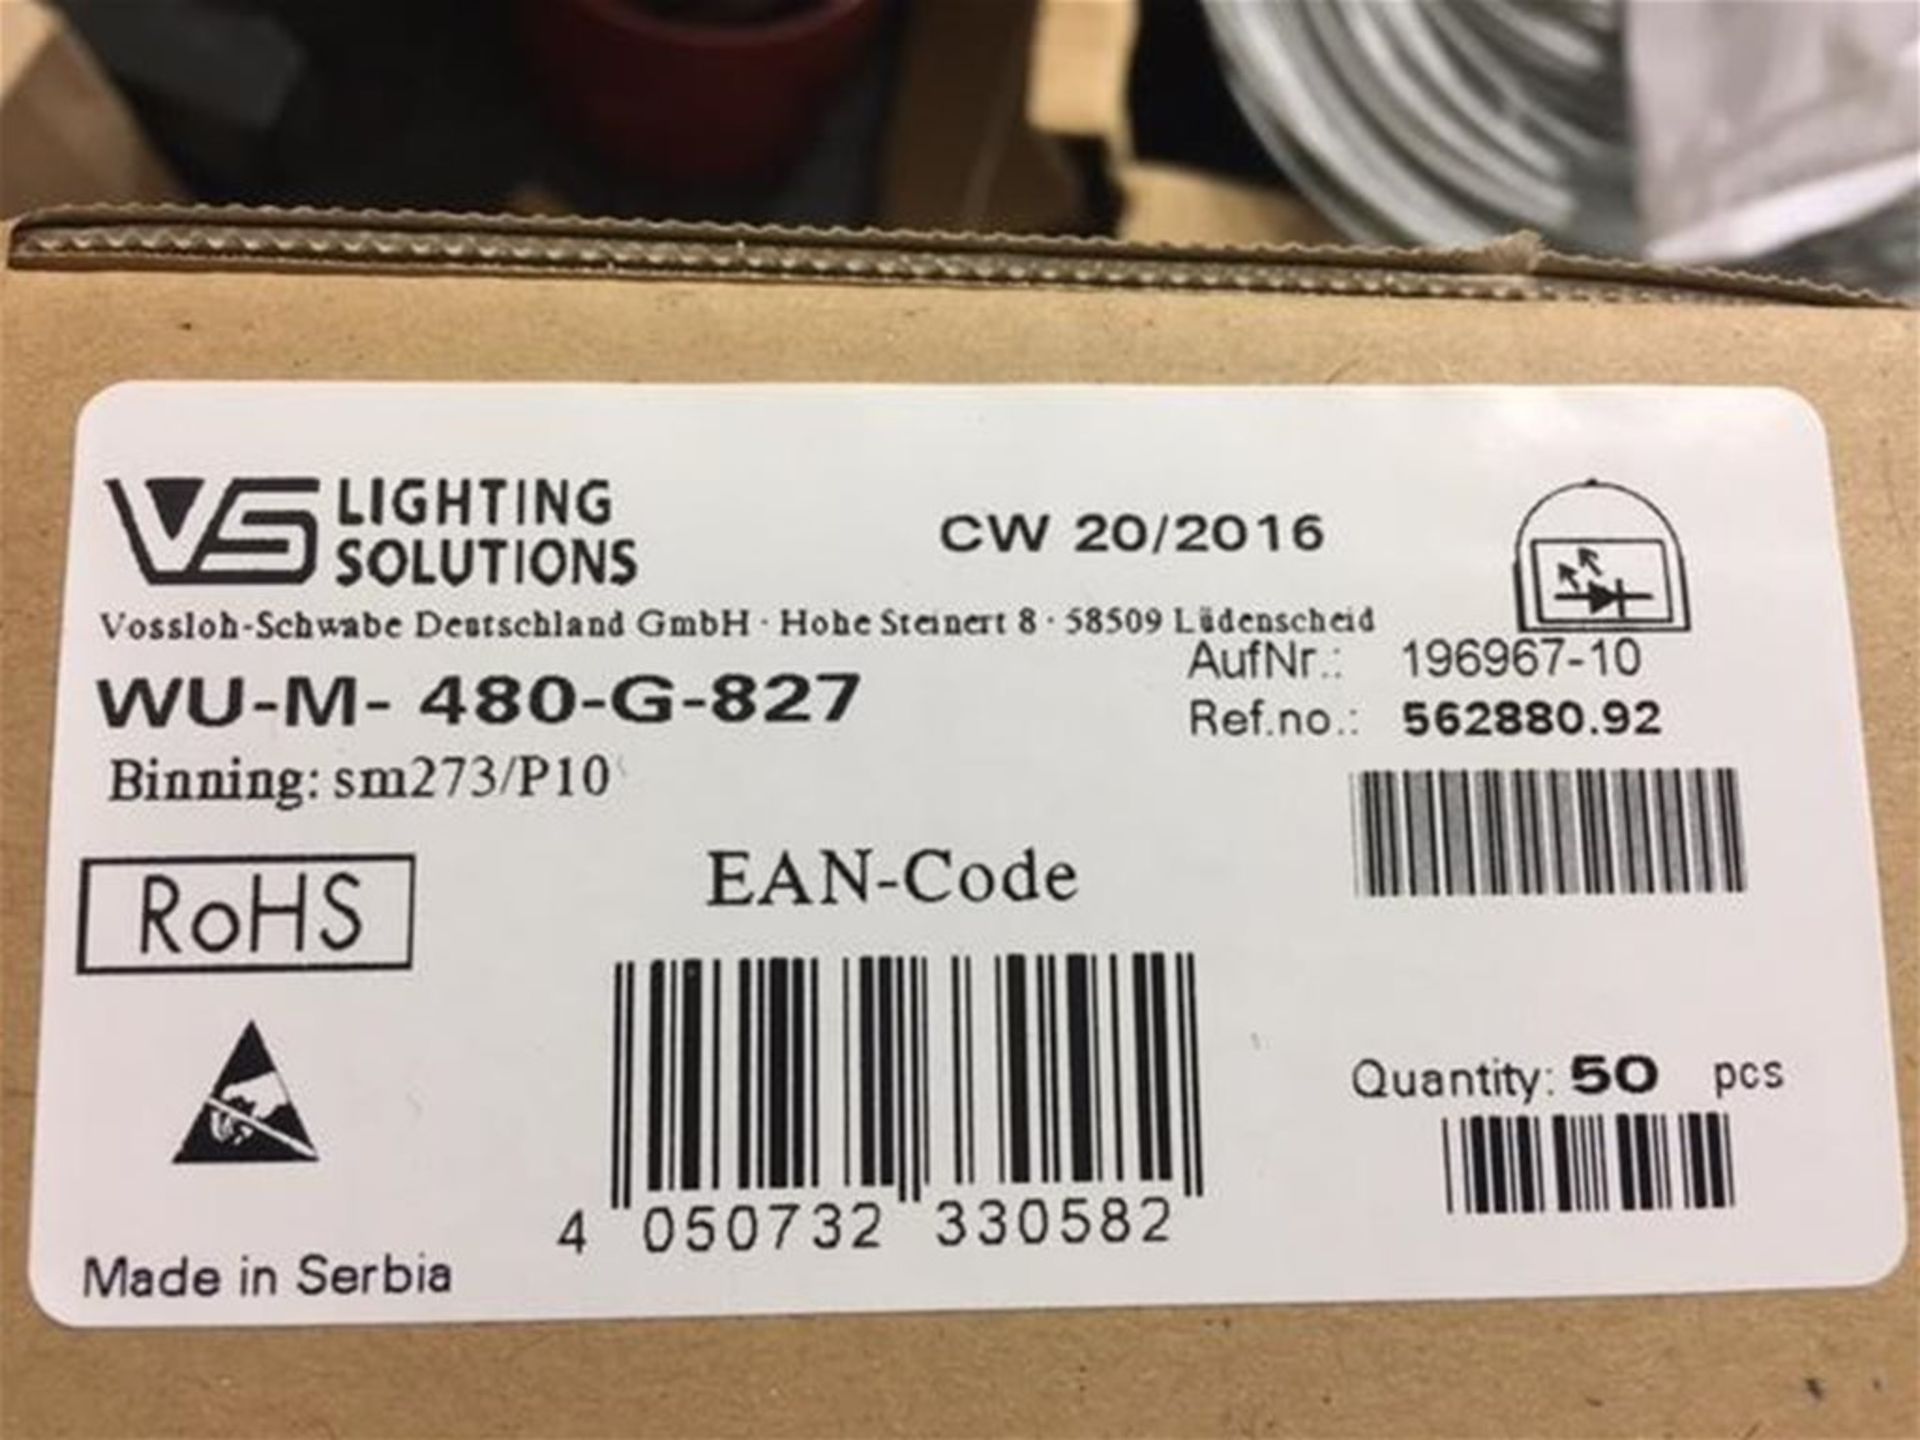 New 50x LED Boards wu-m480-g-827 By Vossloh Schwabe - Image 6 of 6